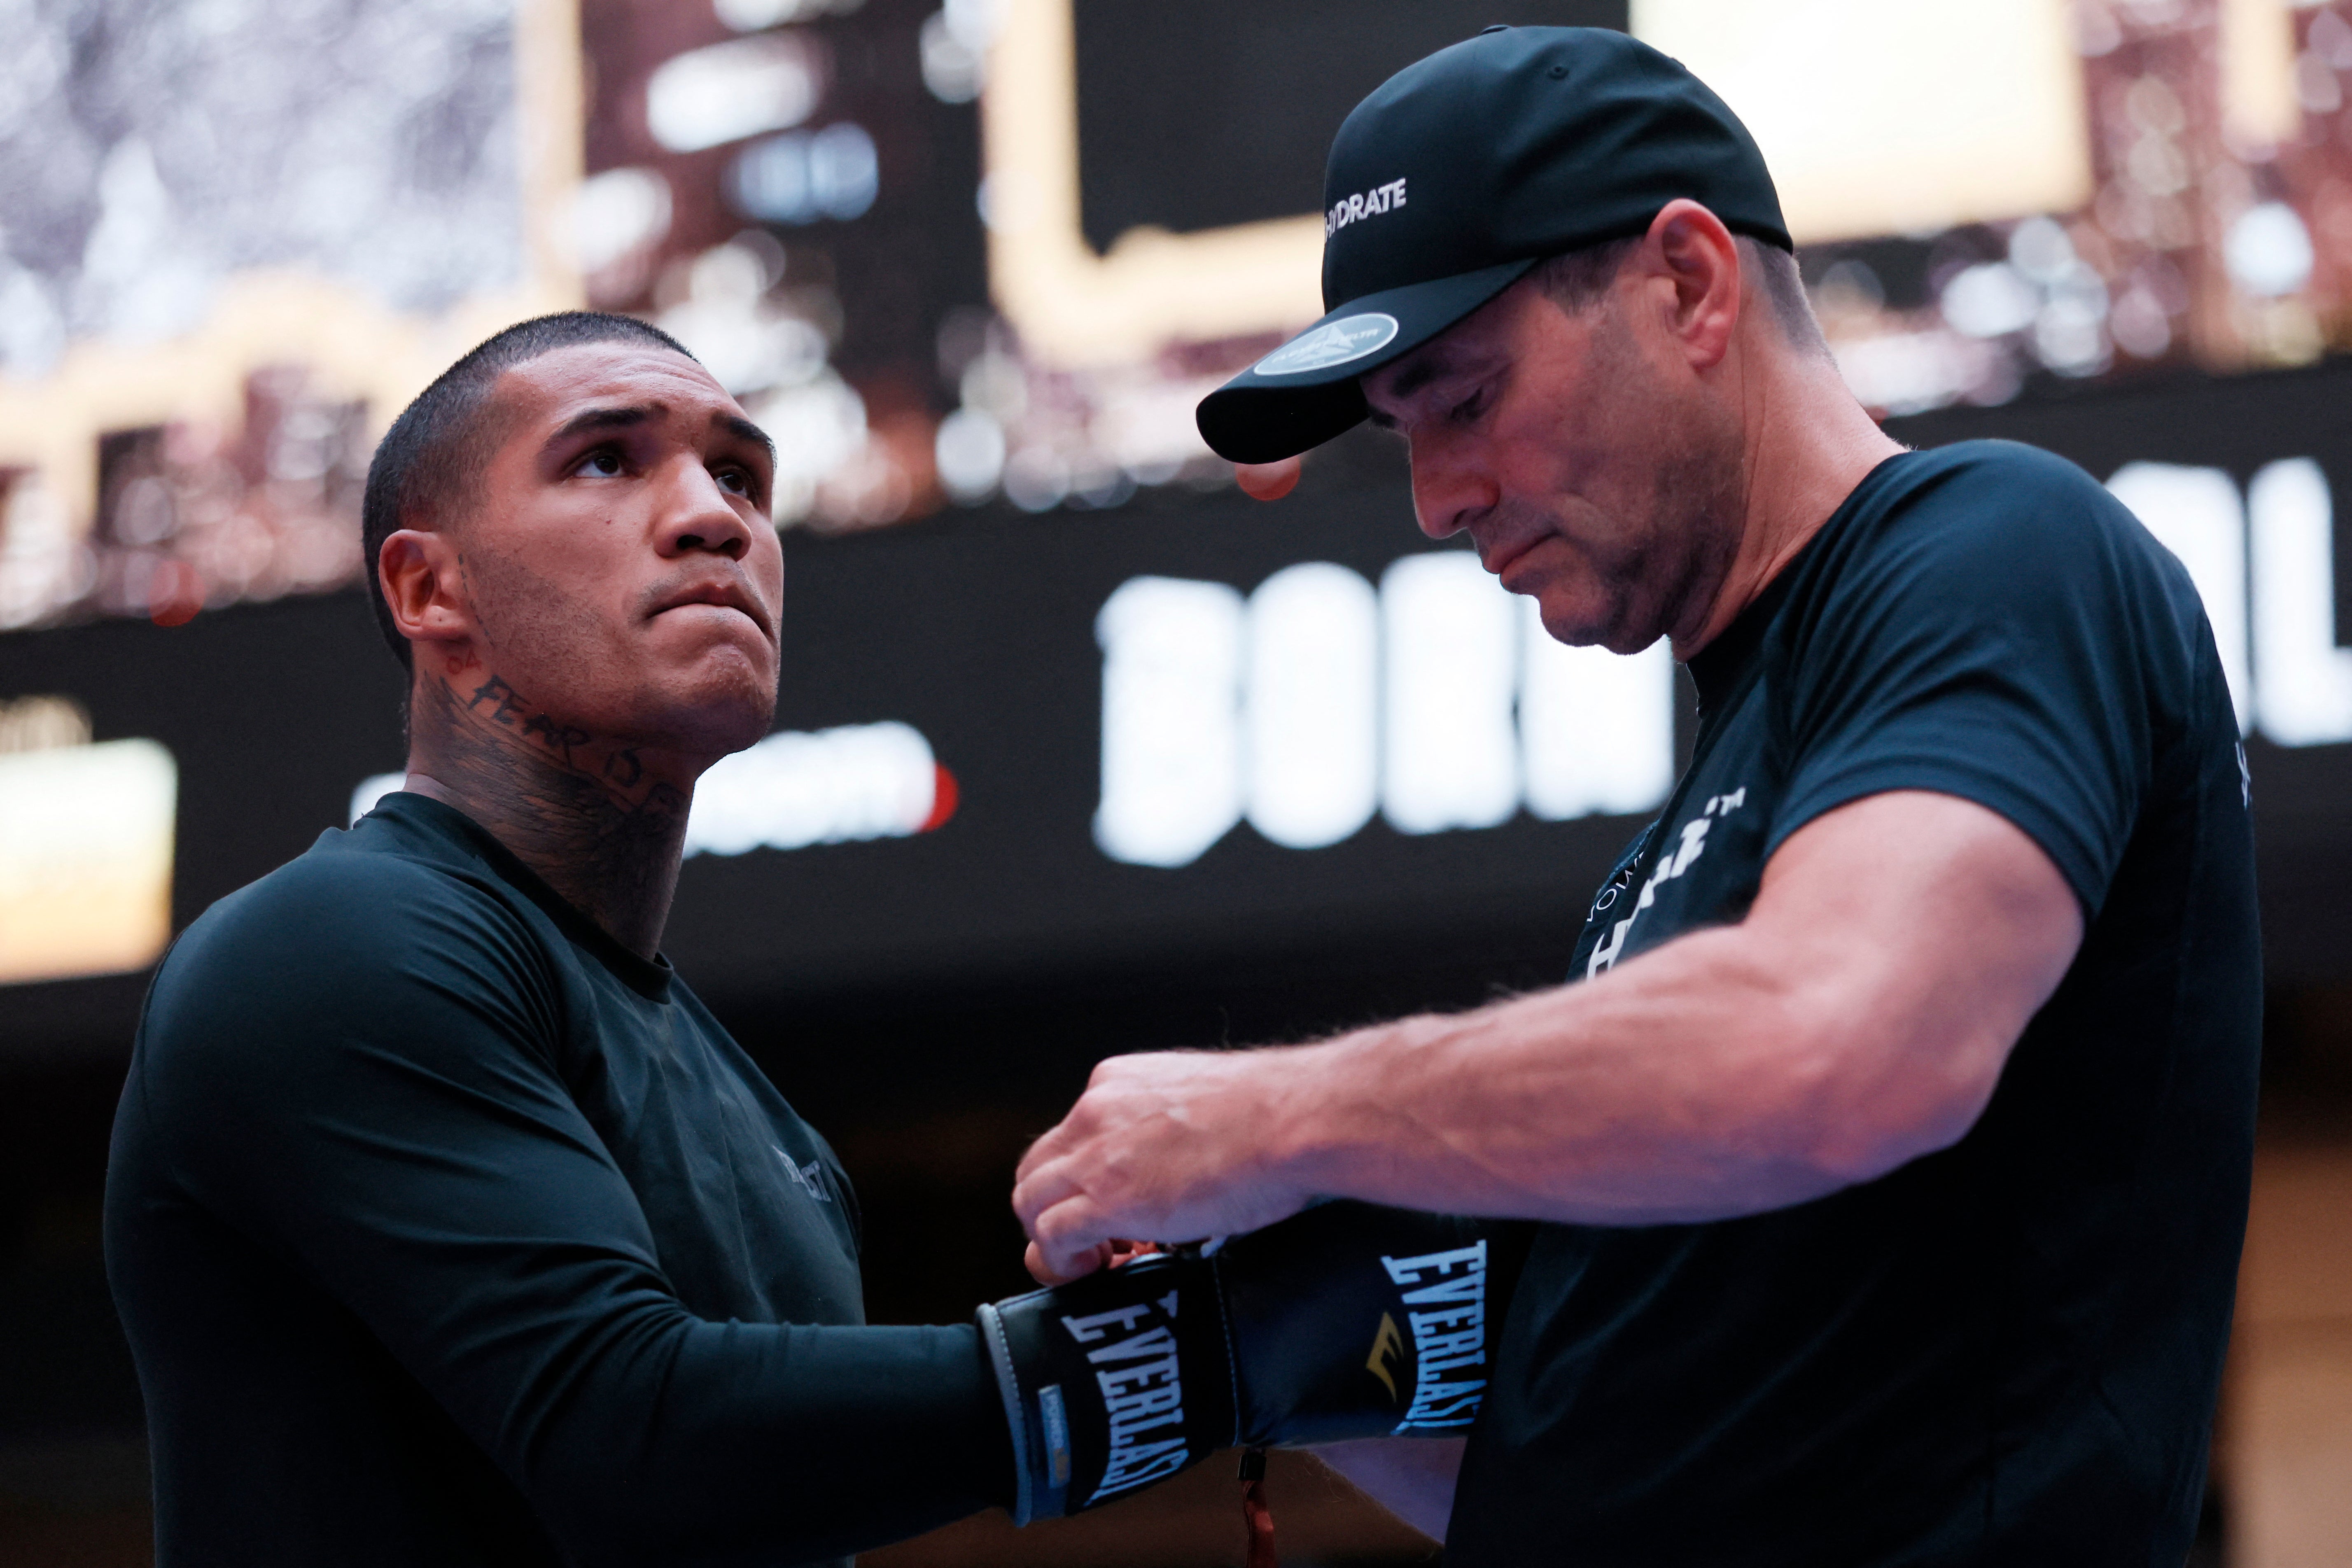 Conor Benn What is clomifene? The Independent